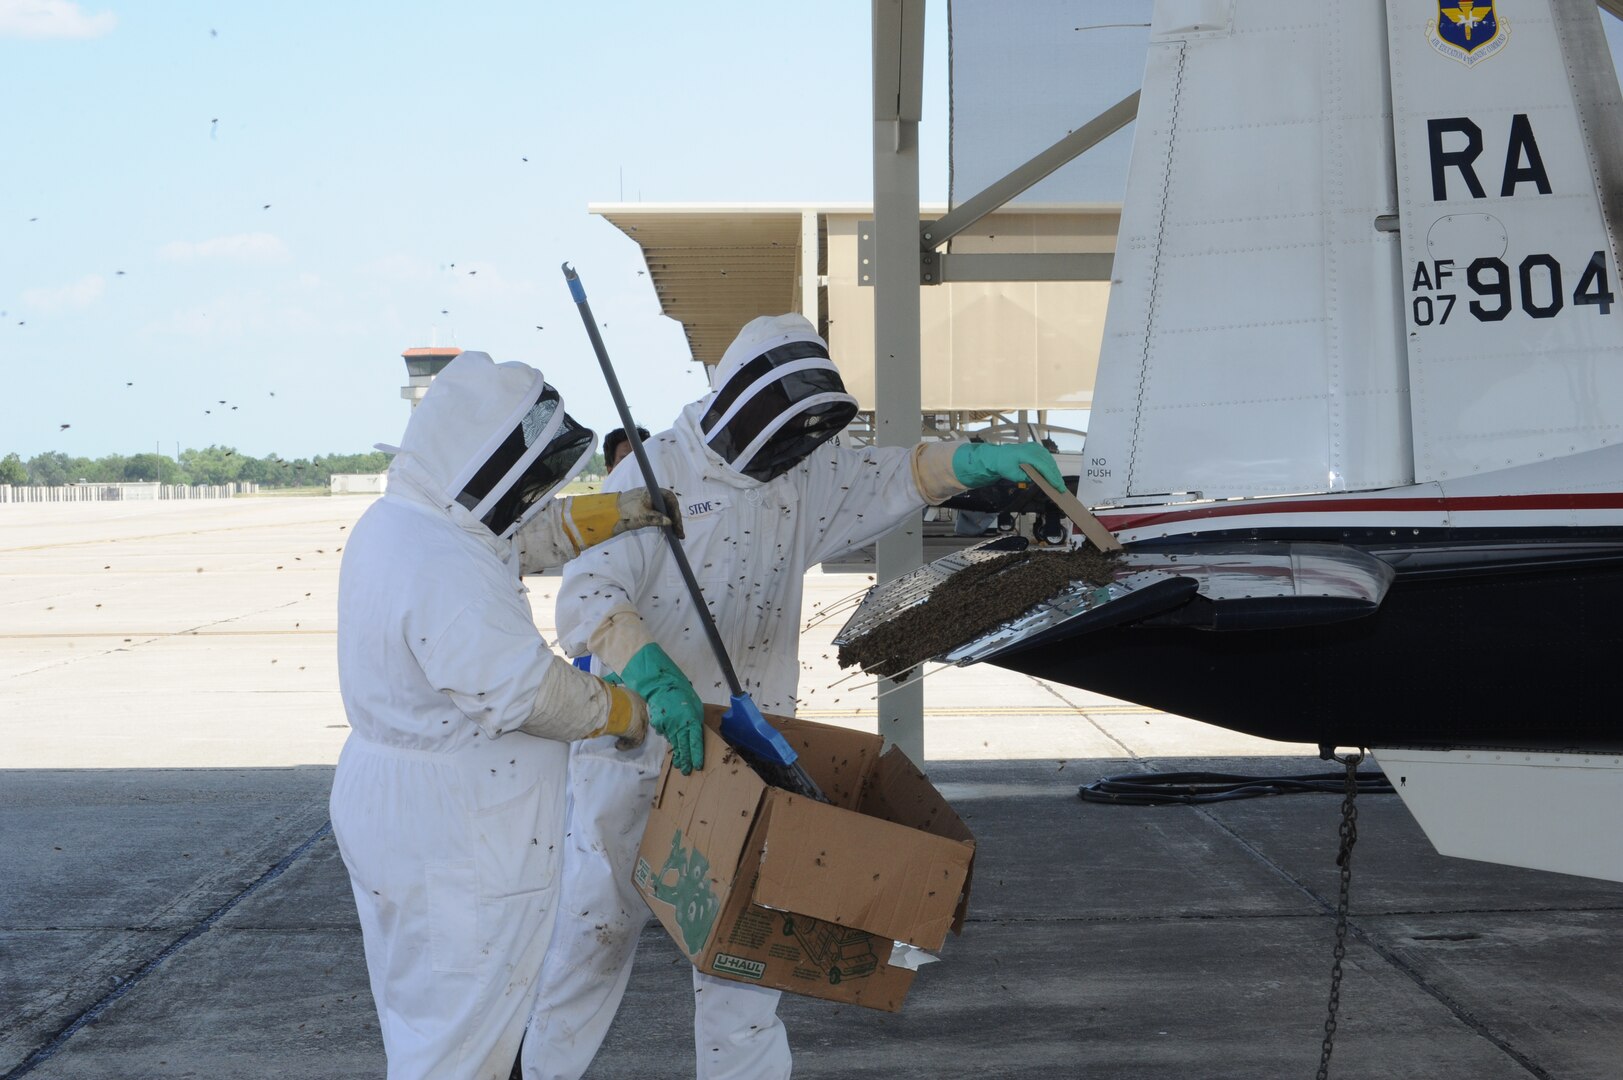 Steve Kelly (right) and Mike Lloyd, 902nd Civil Engineer Squadron entomology section, use cardboard and a broom to remove a swarm of bees on the flap of a T-6 Texan II aircraft on the flightline at Joint Base San Antonio-Randolph, Texas, June 13. (U.S. Air Force photo by Rich McFadden) 